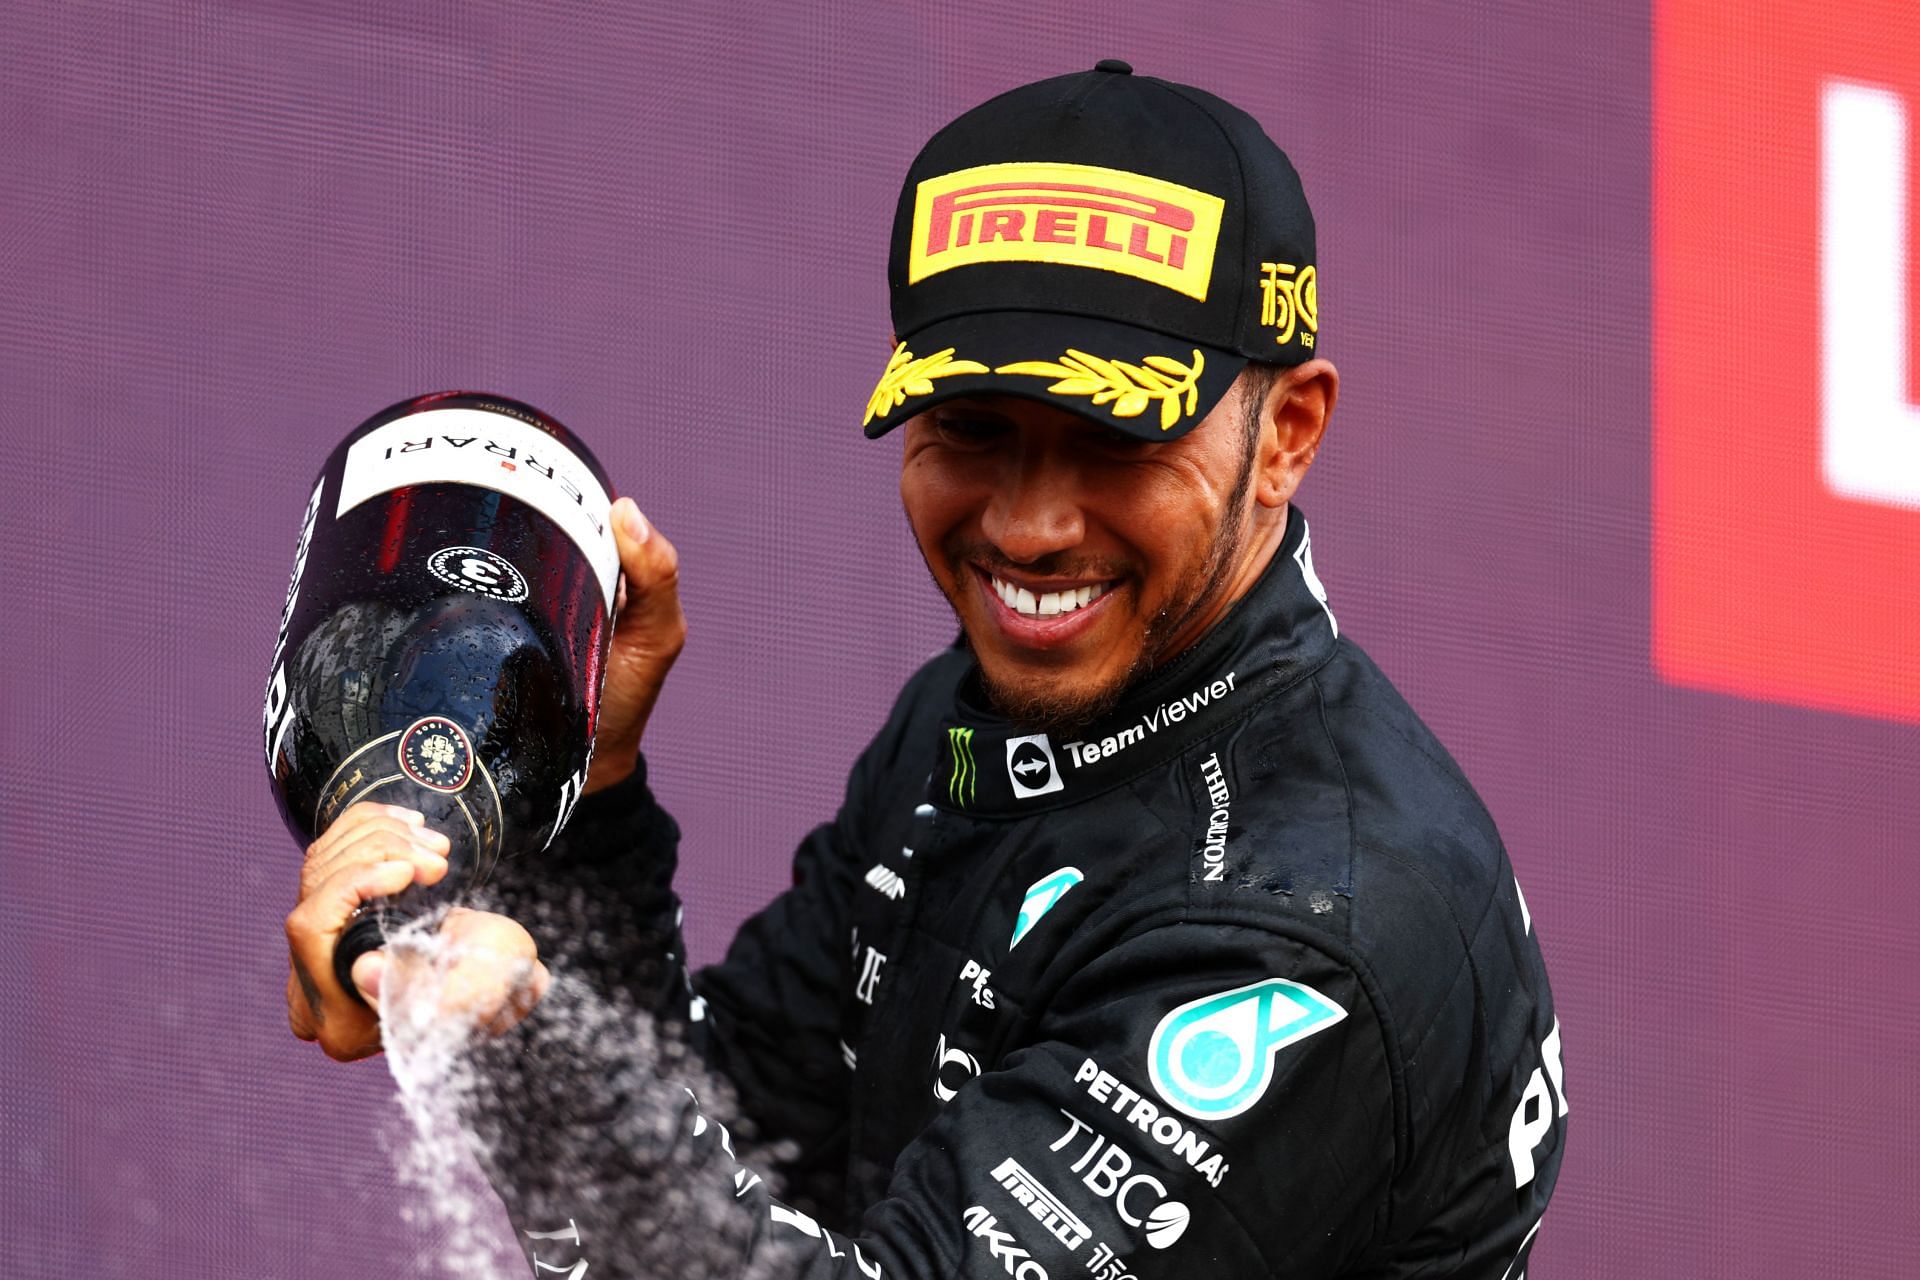 A Lewis Hamilton win is surely a possibility at the 2022 F1 French GP